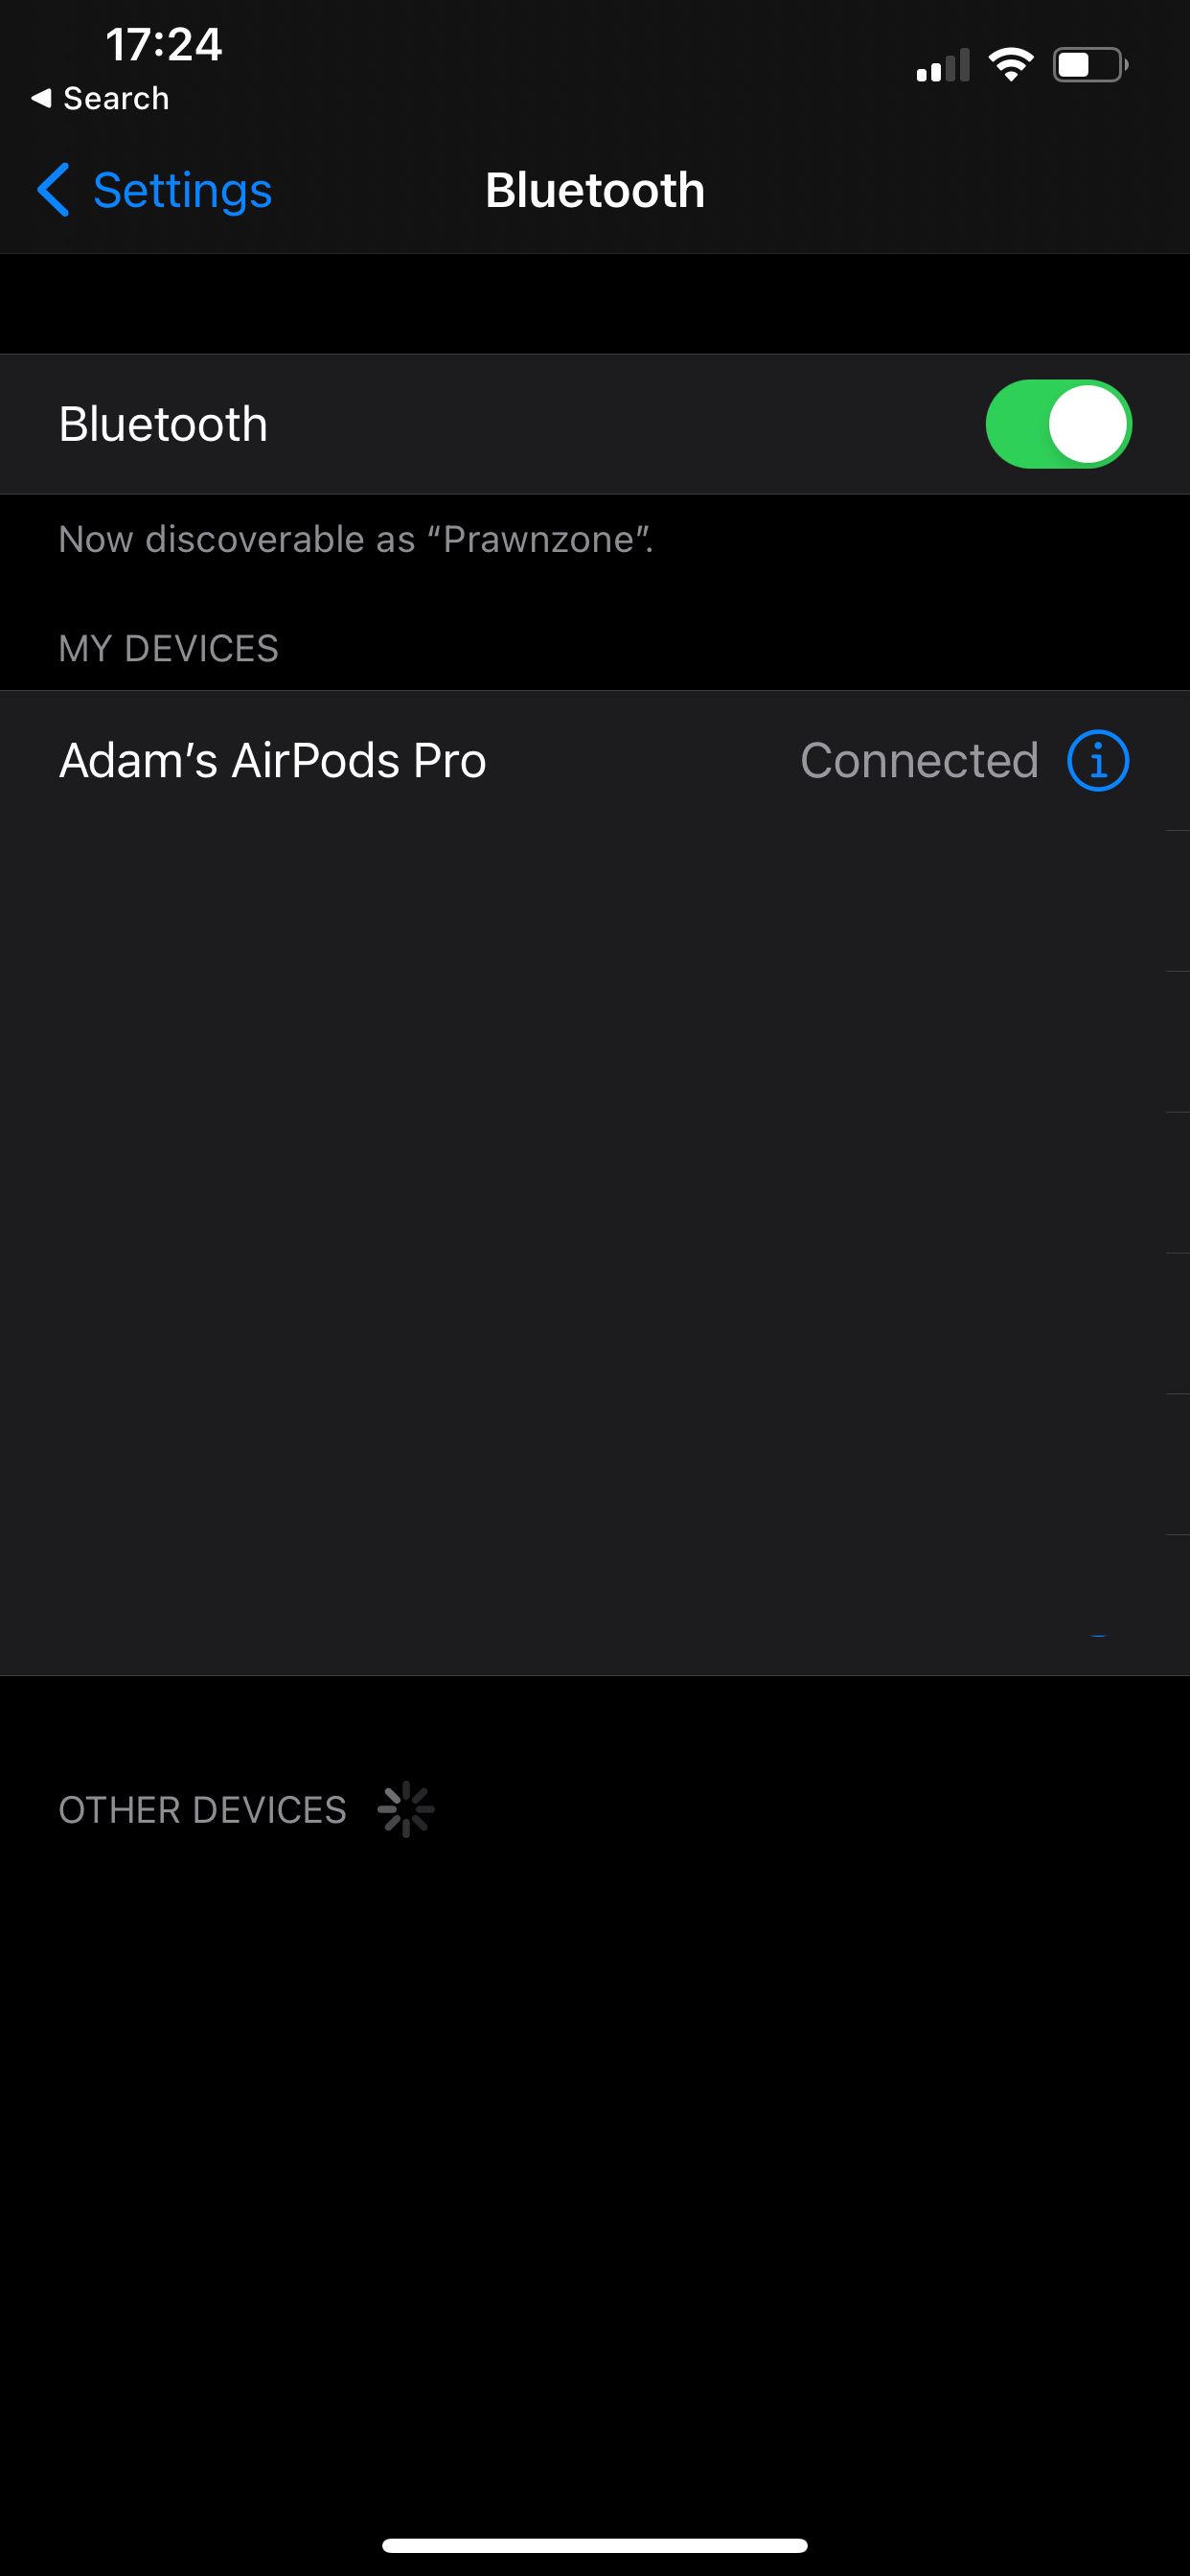 Bluetooth settings for AirPods Pro